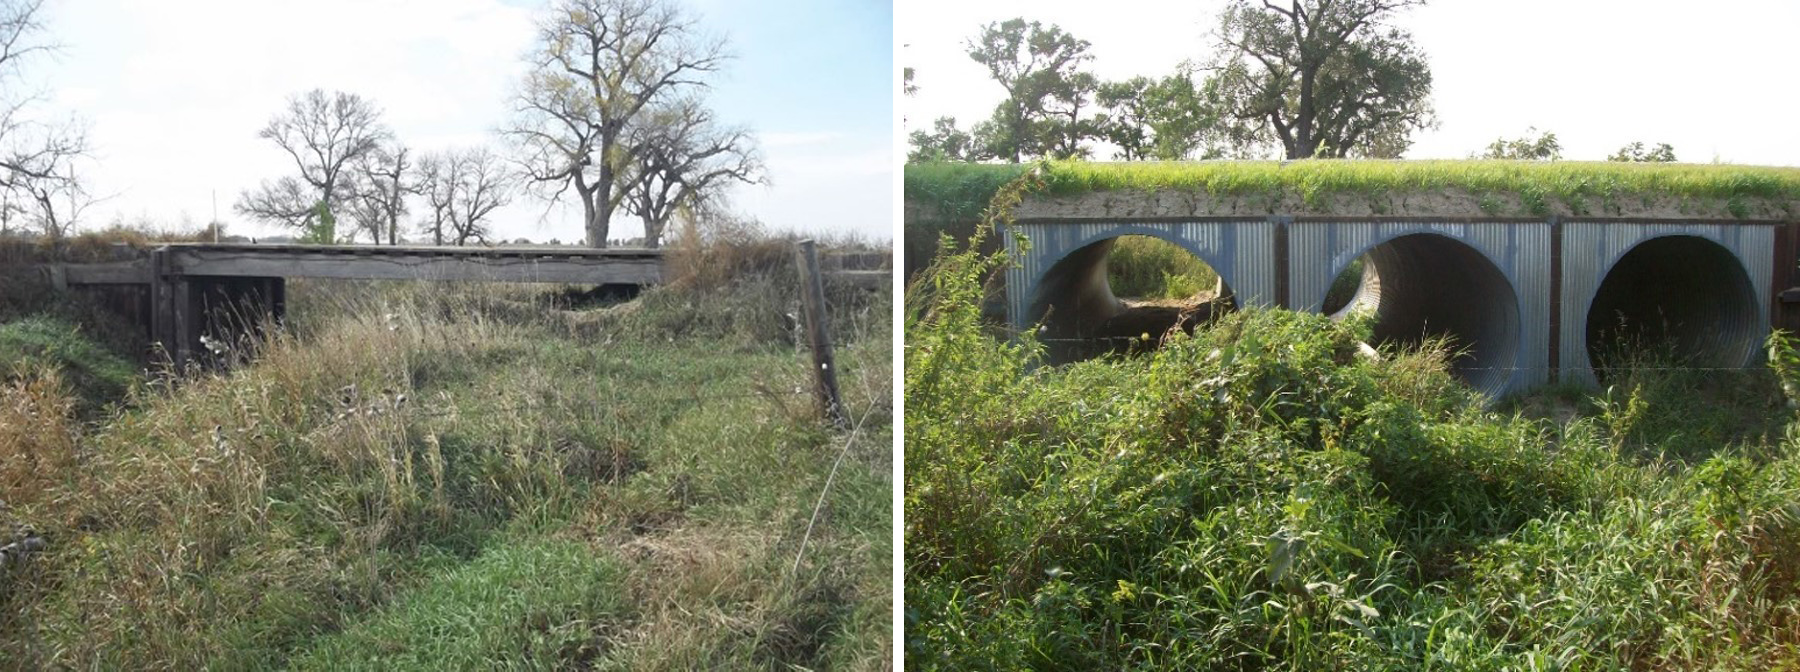 Side-by-side before and after pictures of a bridge and its replacement. At left, old bridge, and at right, new bridge.